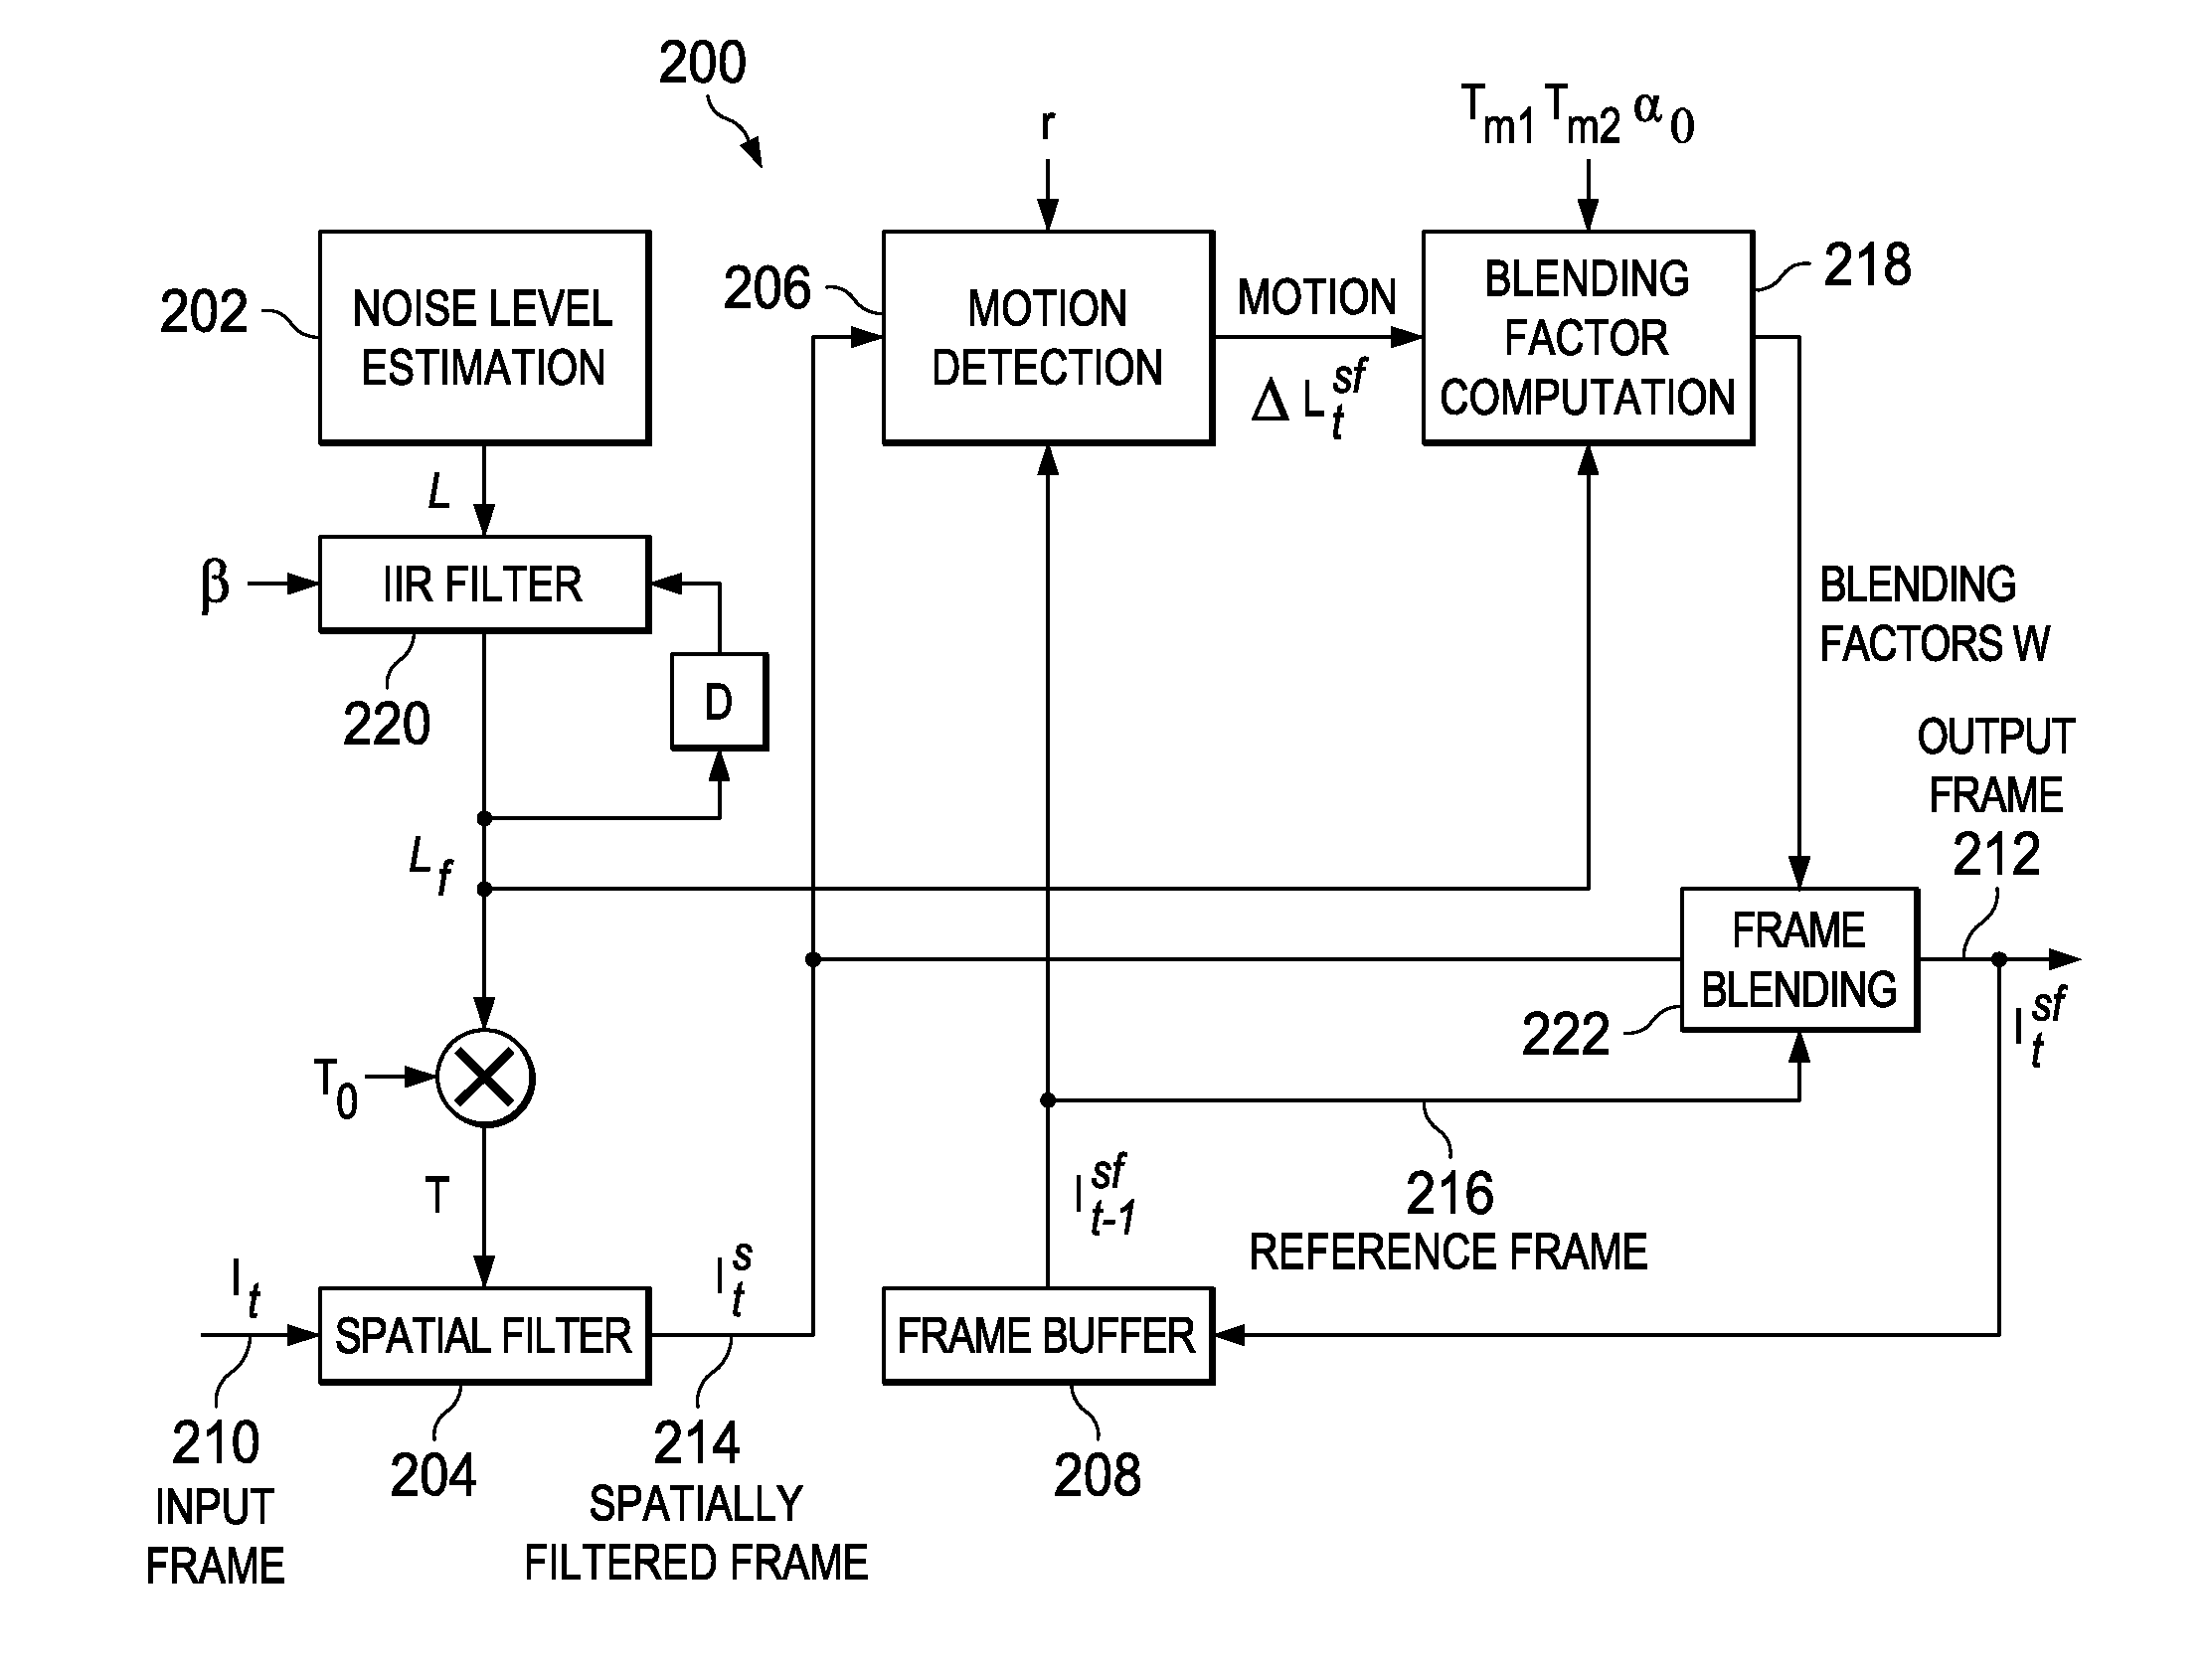 Multi-pass video noise filtering